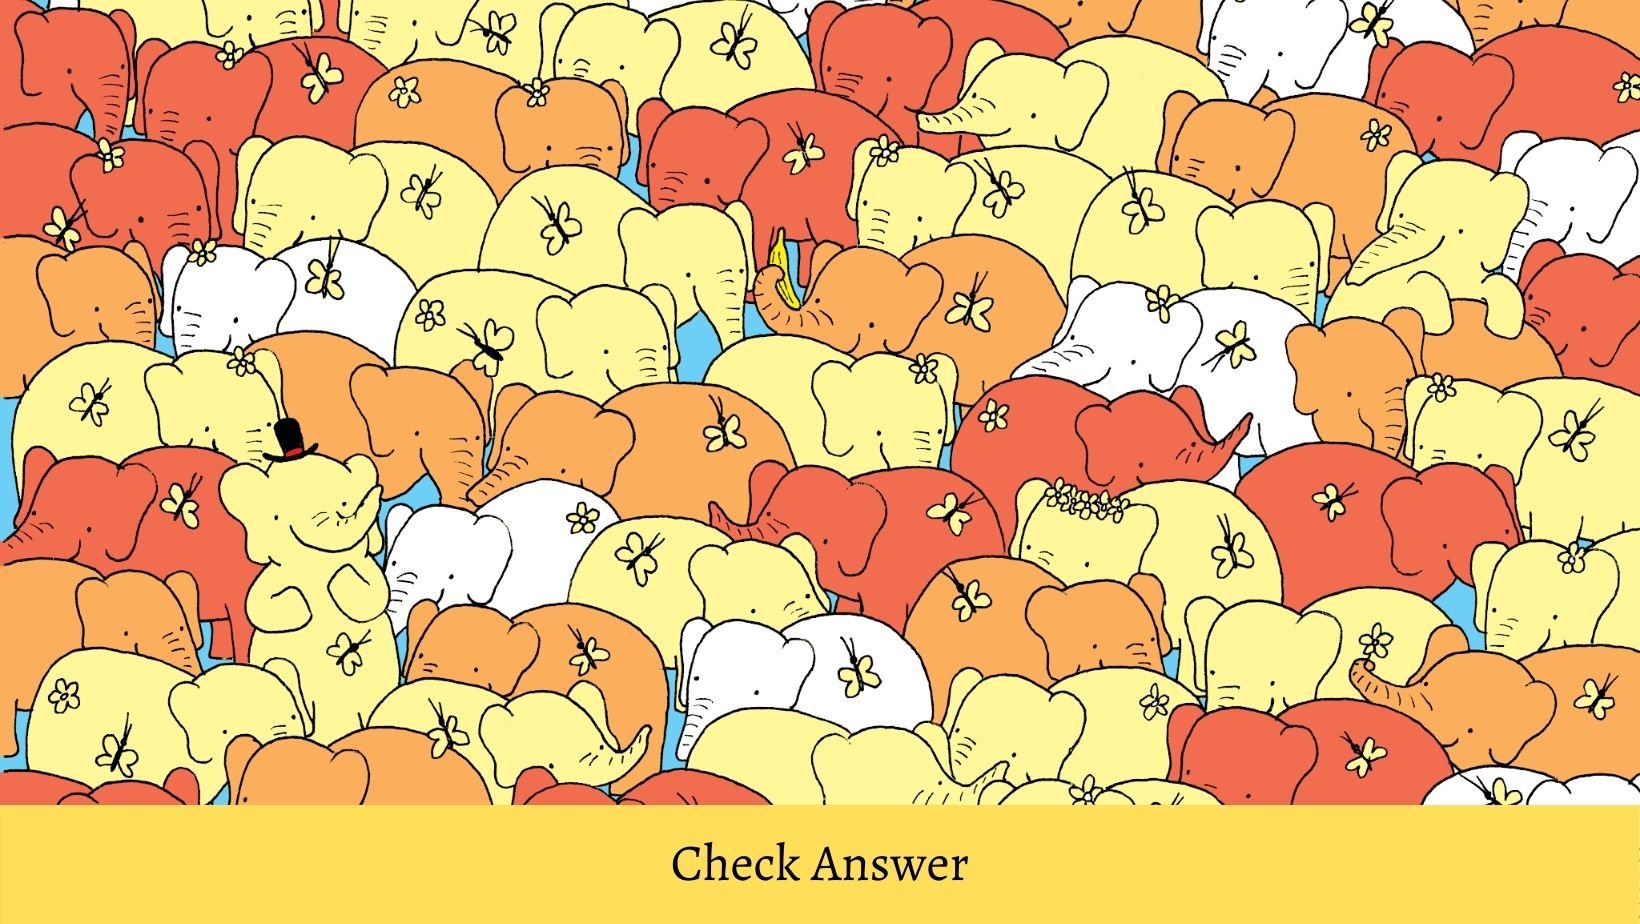 small joys thumbnail 19.jpg?resize=412,232 - There’s A Tiny HEART In This Herd Of Elephants, Can You Spot It?